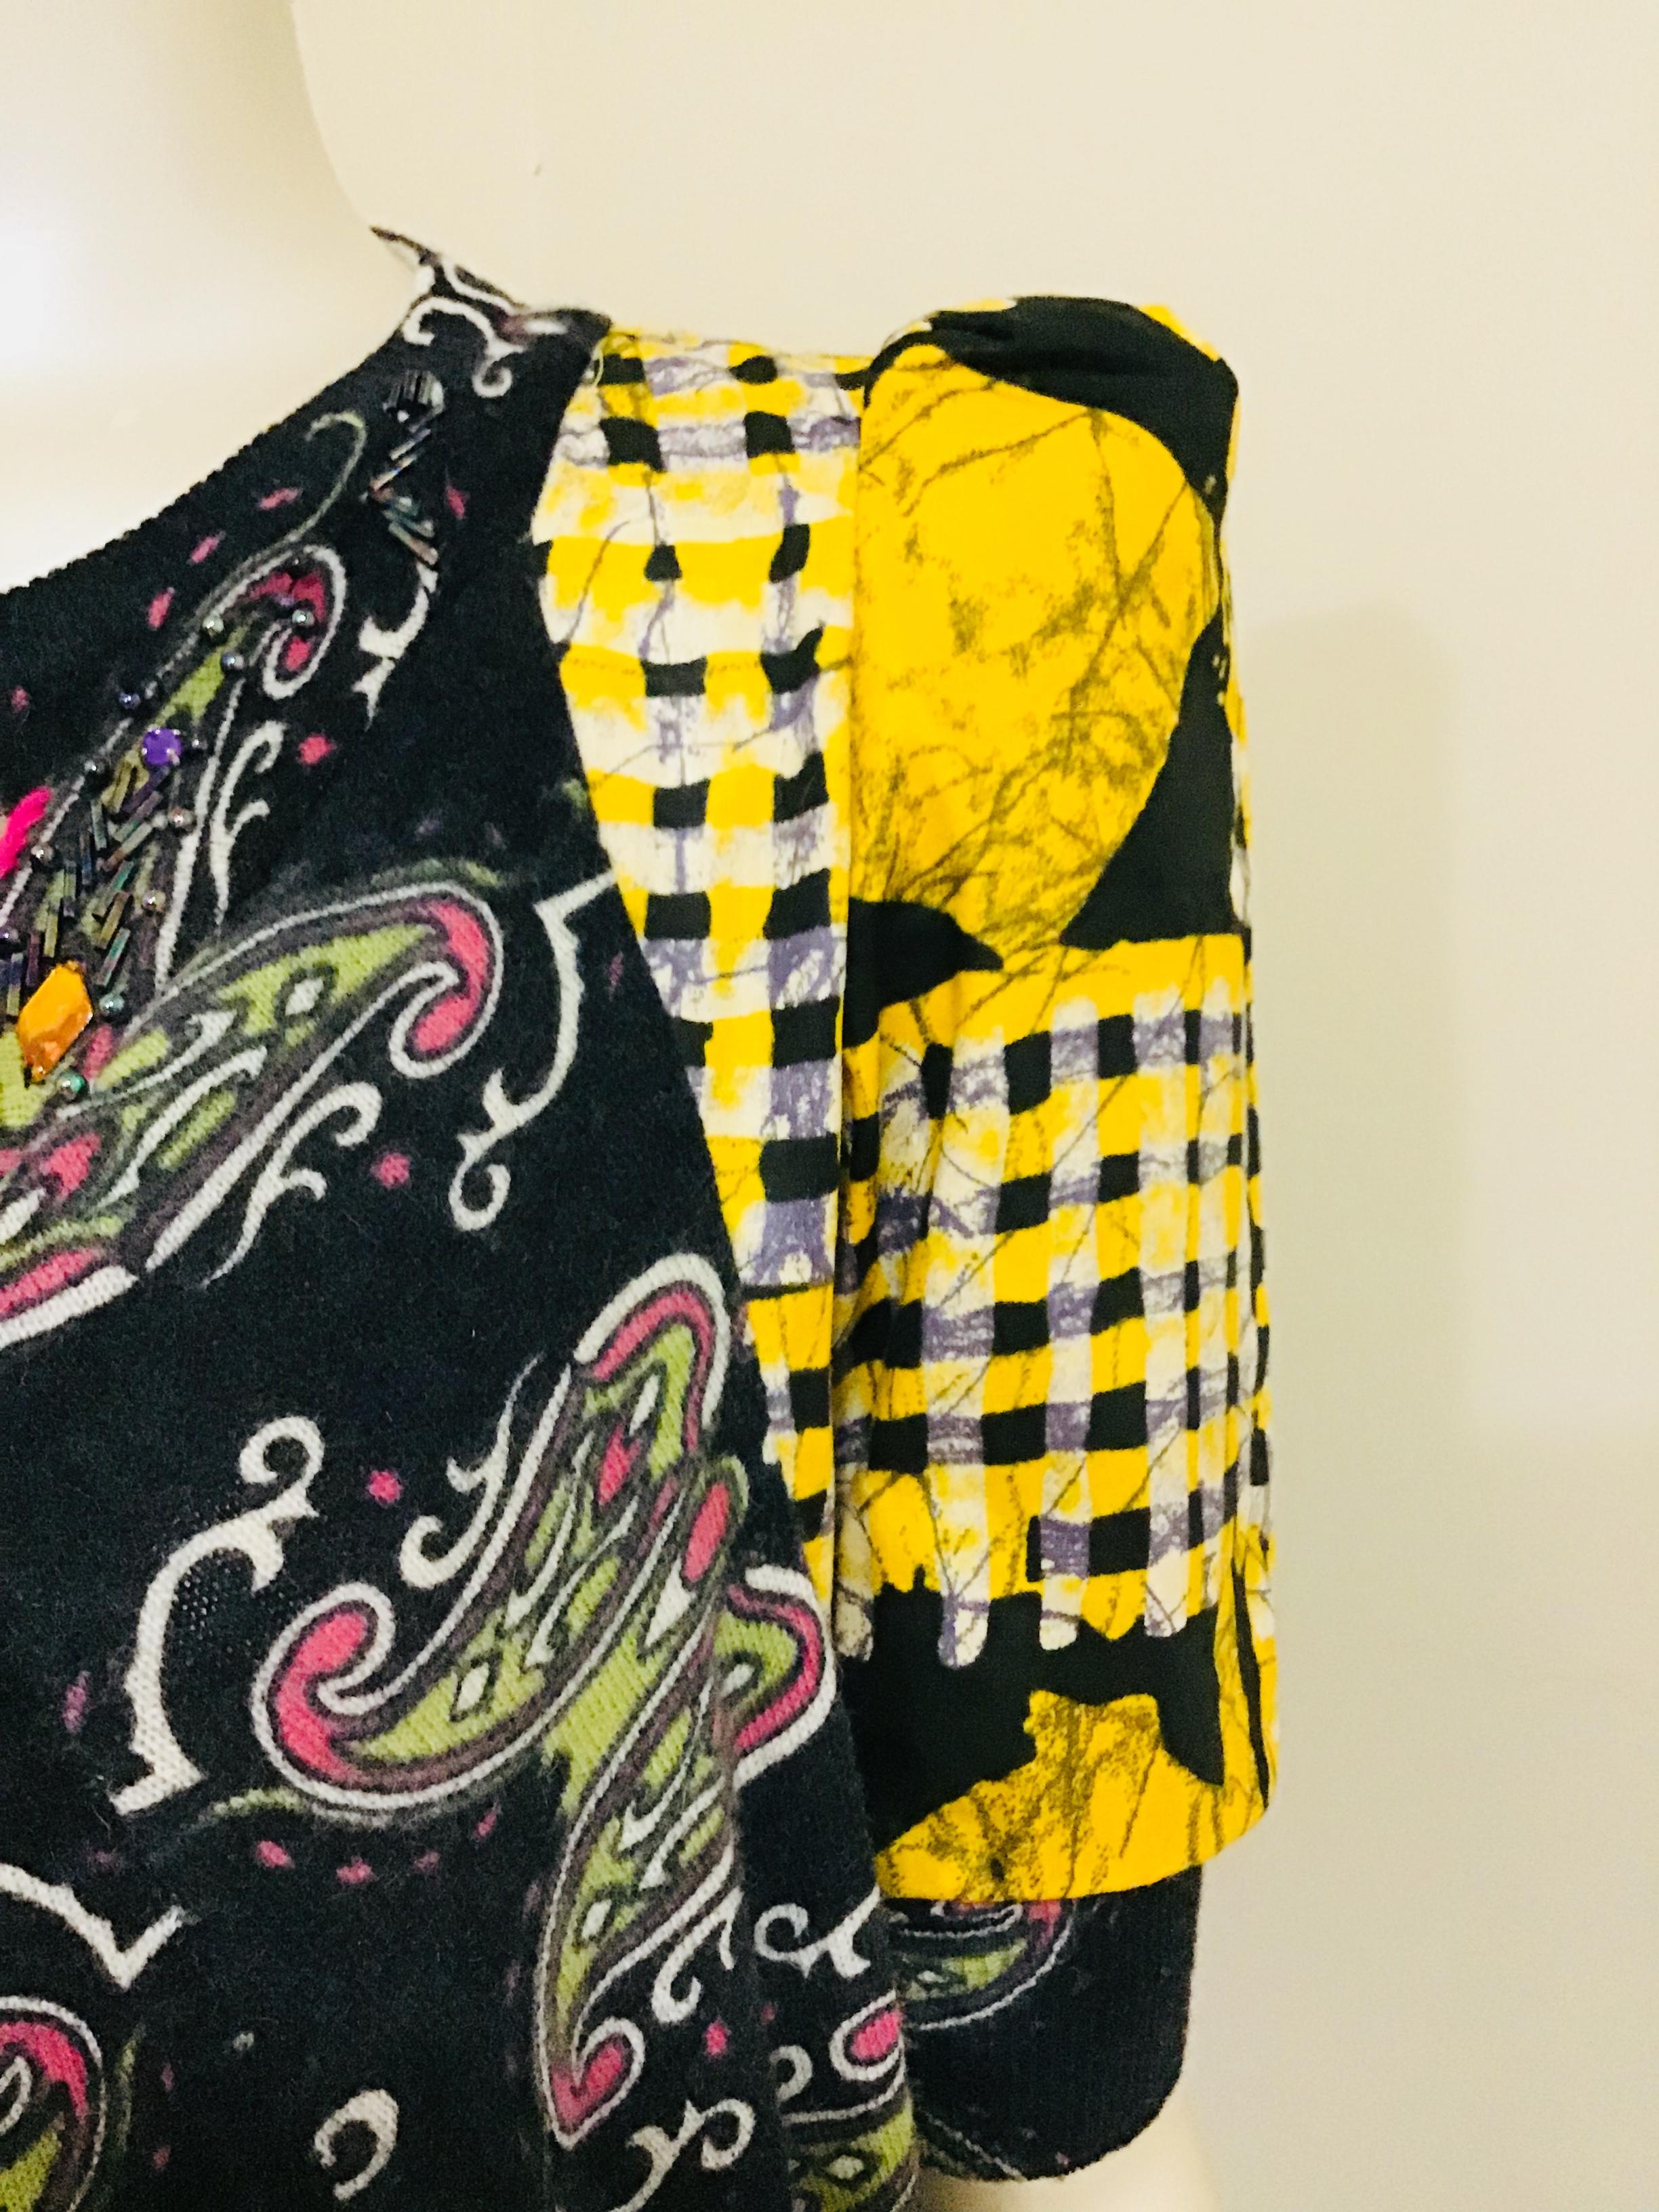 Stand out in this super mini dress or top! The bold yellow from the ethnic print blended with a vintage beaded print sweater creates this very unique silhouette that demands attention. Wear as a super mini with an opaque tight and ankle boot or with